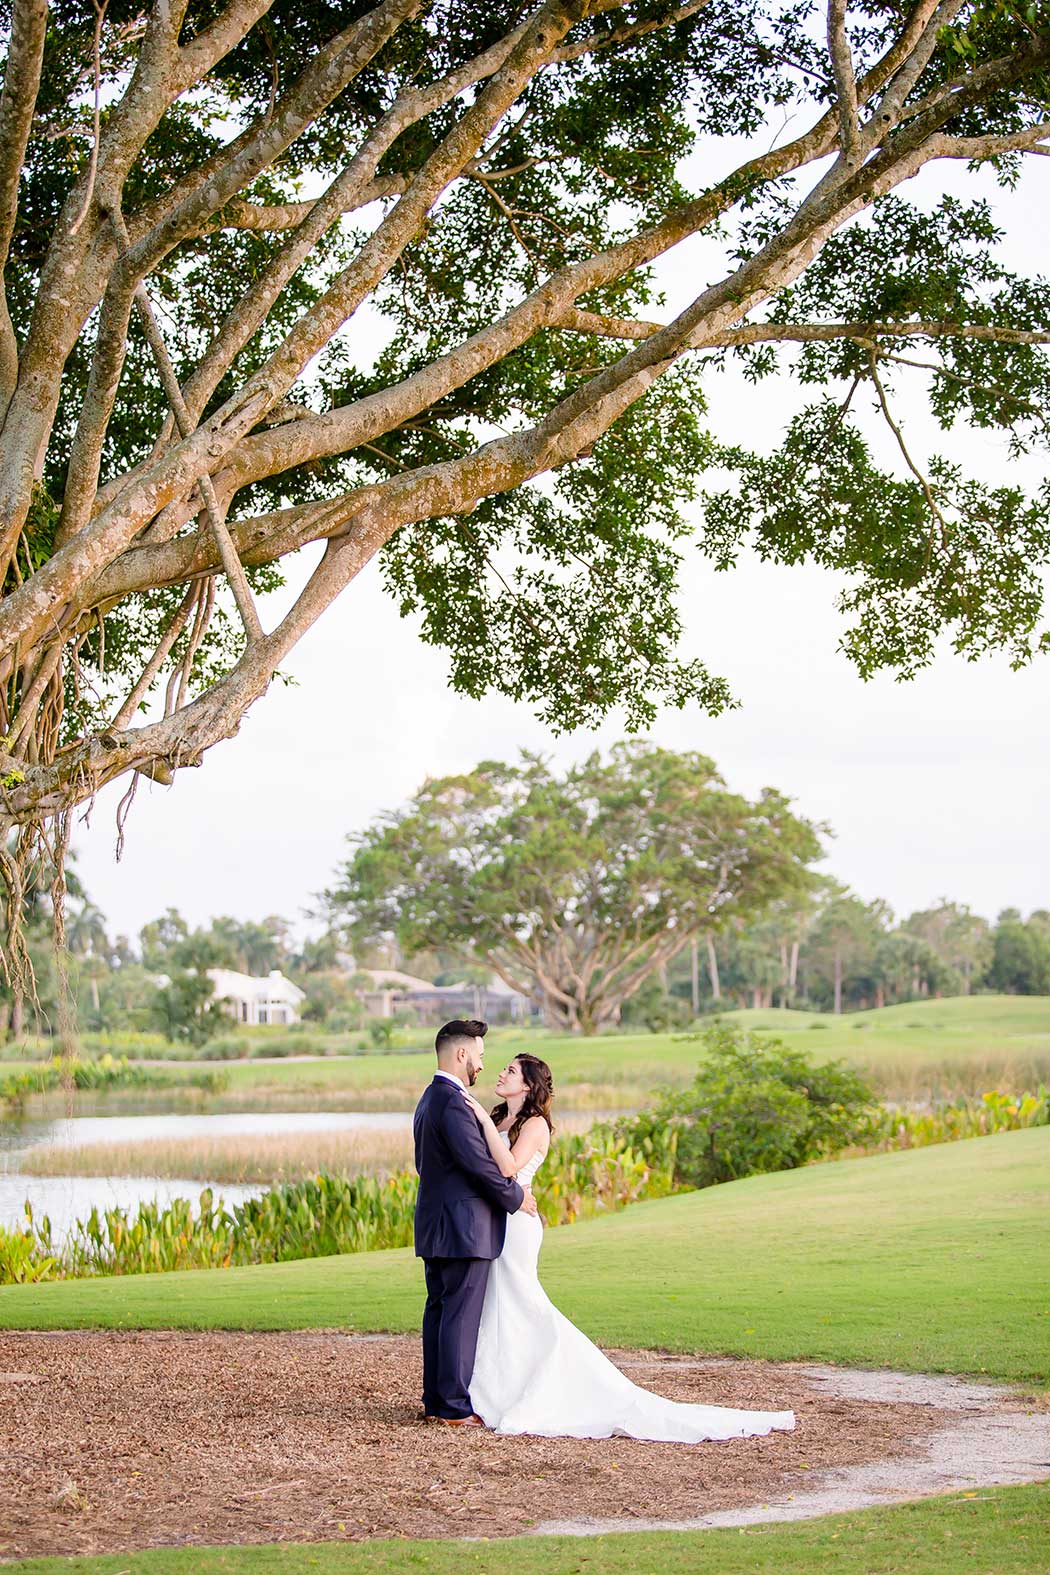 stunning bridal portrait on golf course at breakers west country club | bride and groom under tree | bride holding grooms chest